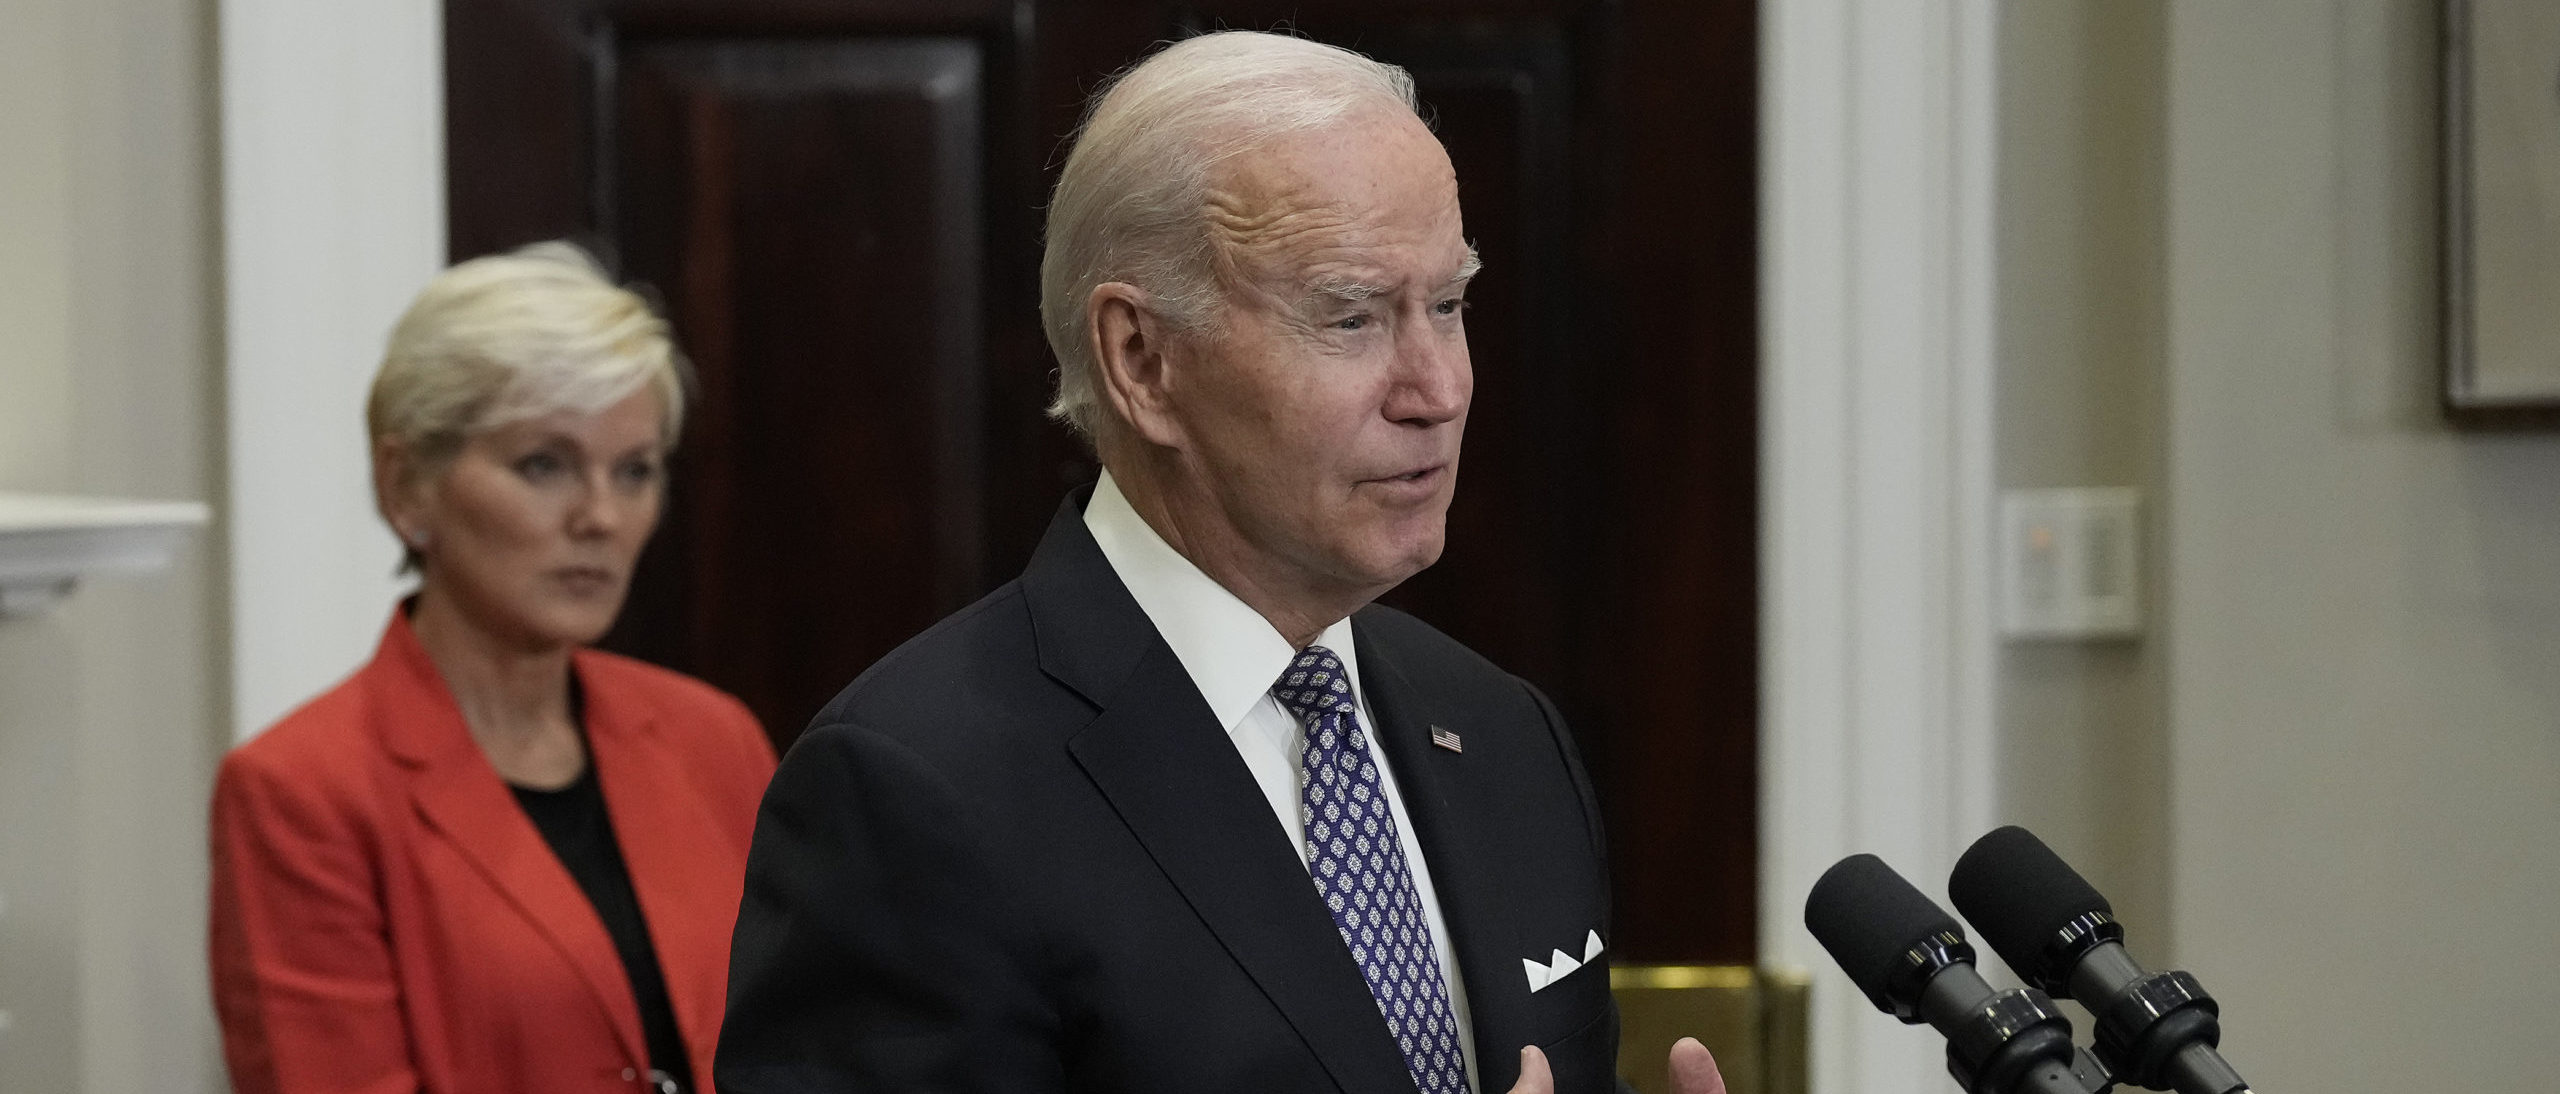 Biden Admin Draws In Record Amount From Offshore Drilling Lease Auction After Trying To Cancel It